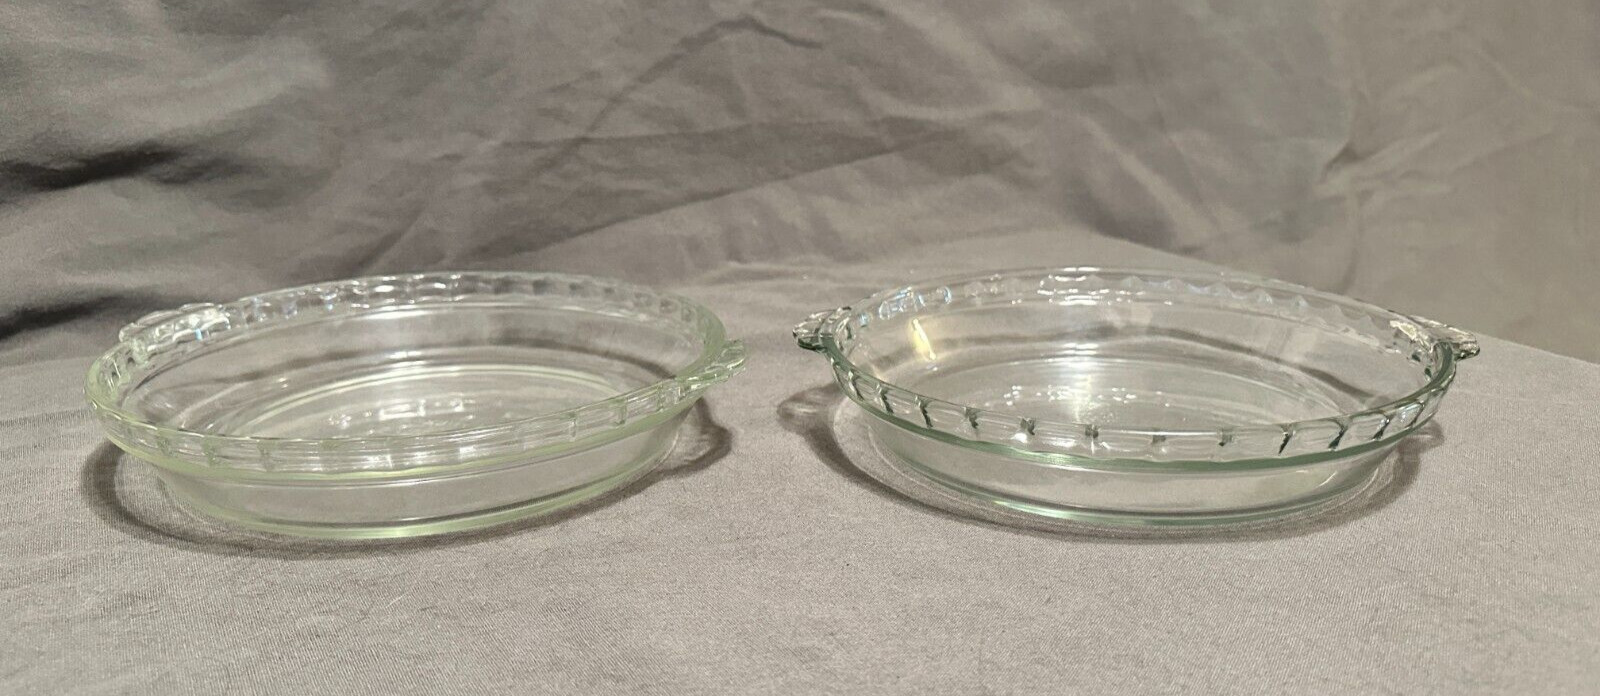 2 Vintage Pyrex 9.5 Inch 24 cm Scalloped Fluted Pyrex Pie Plate No. 229